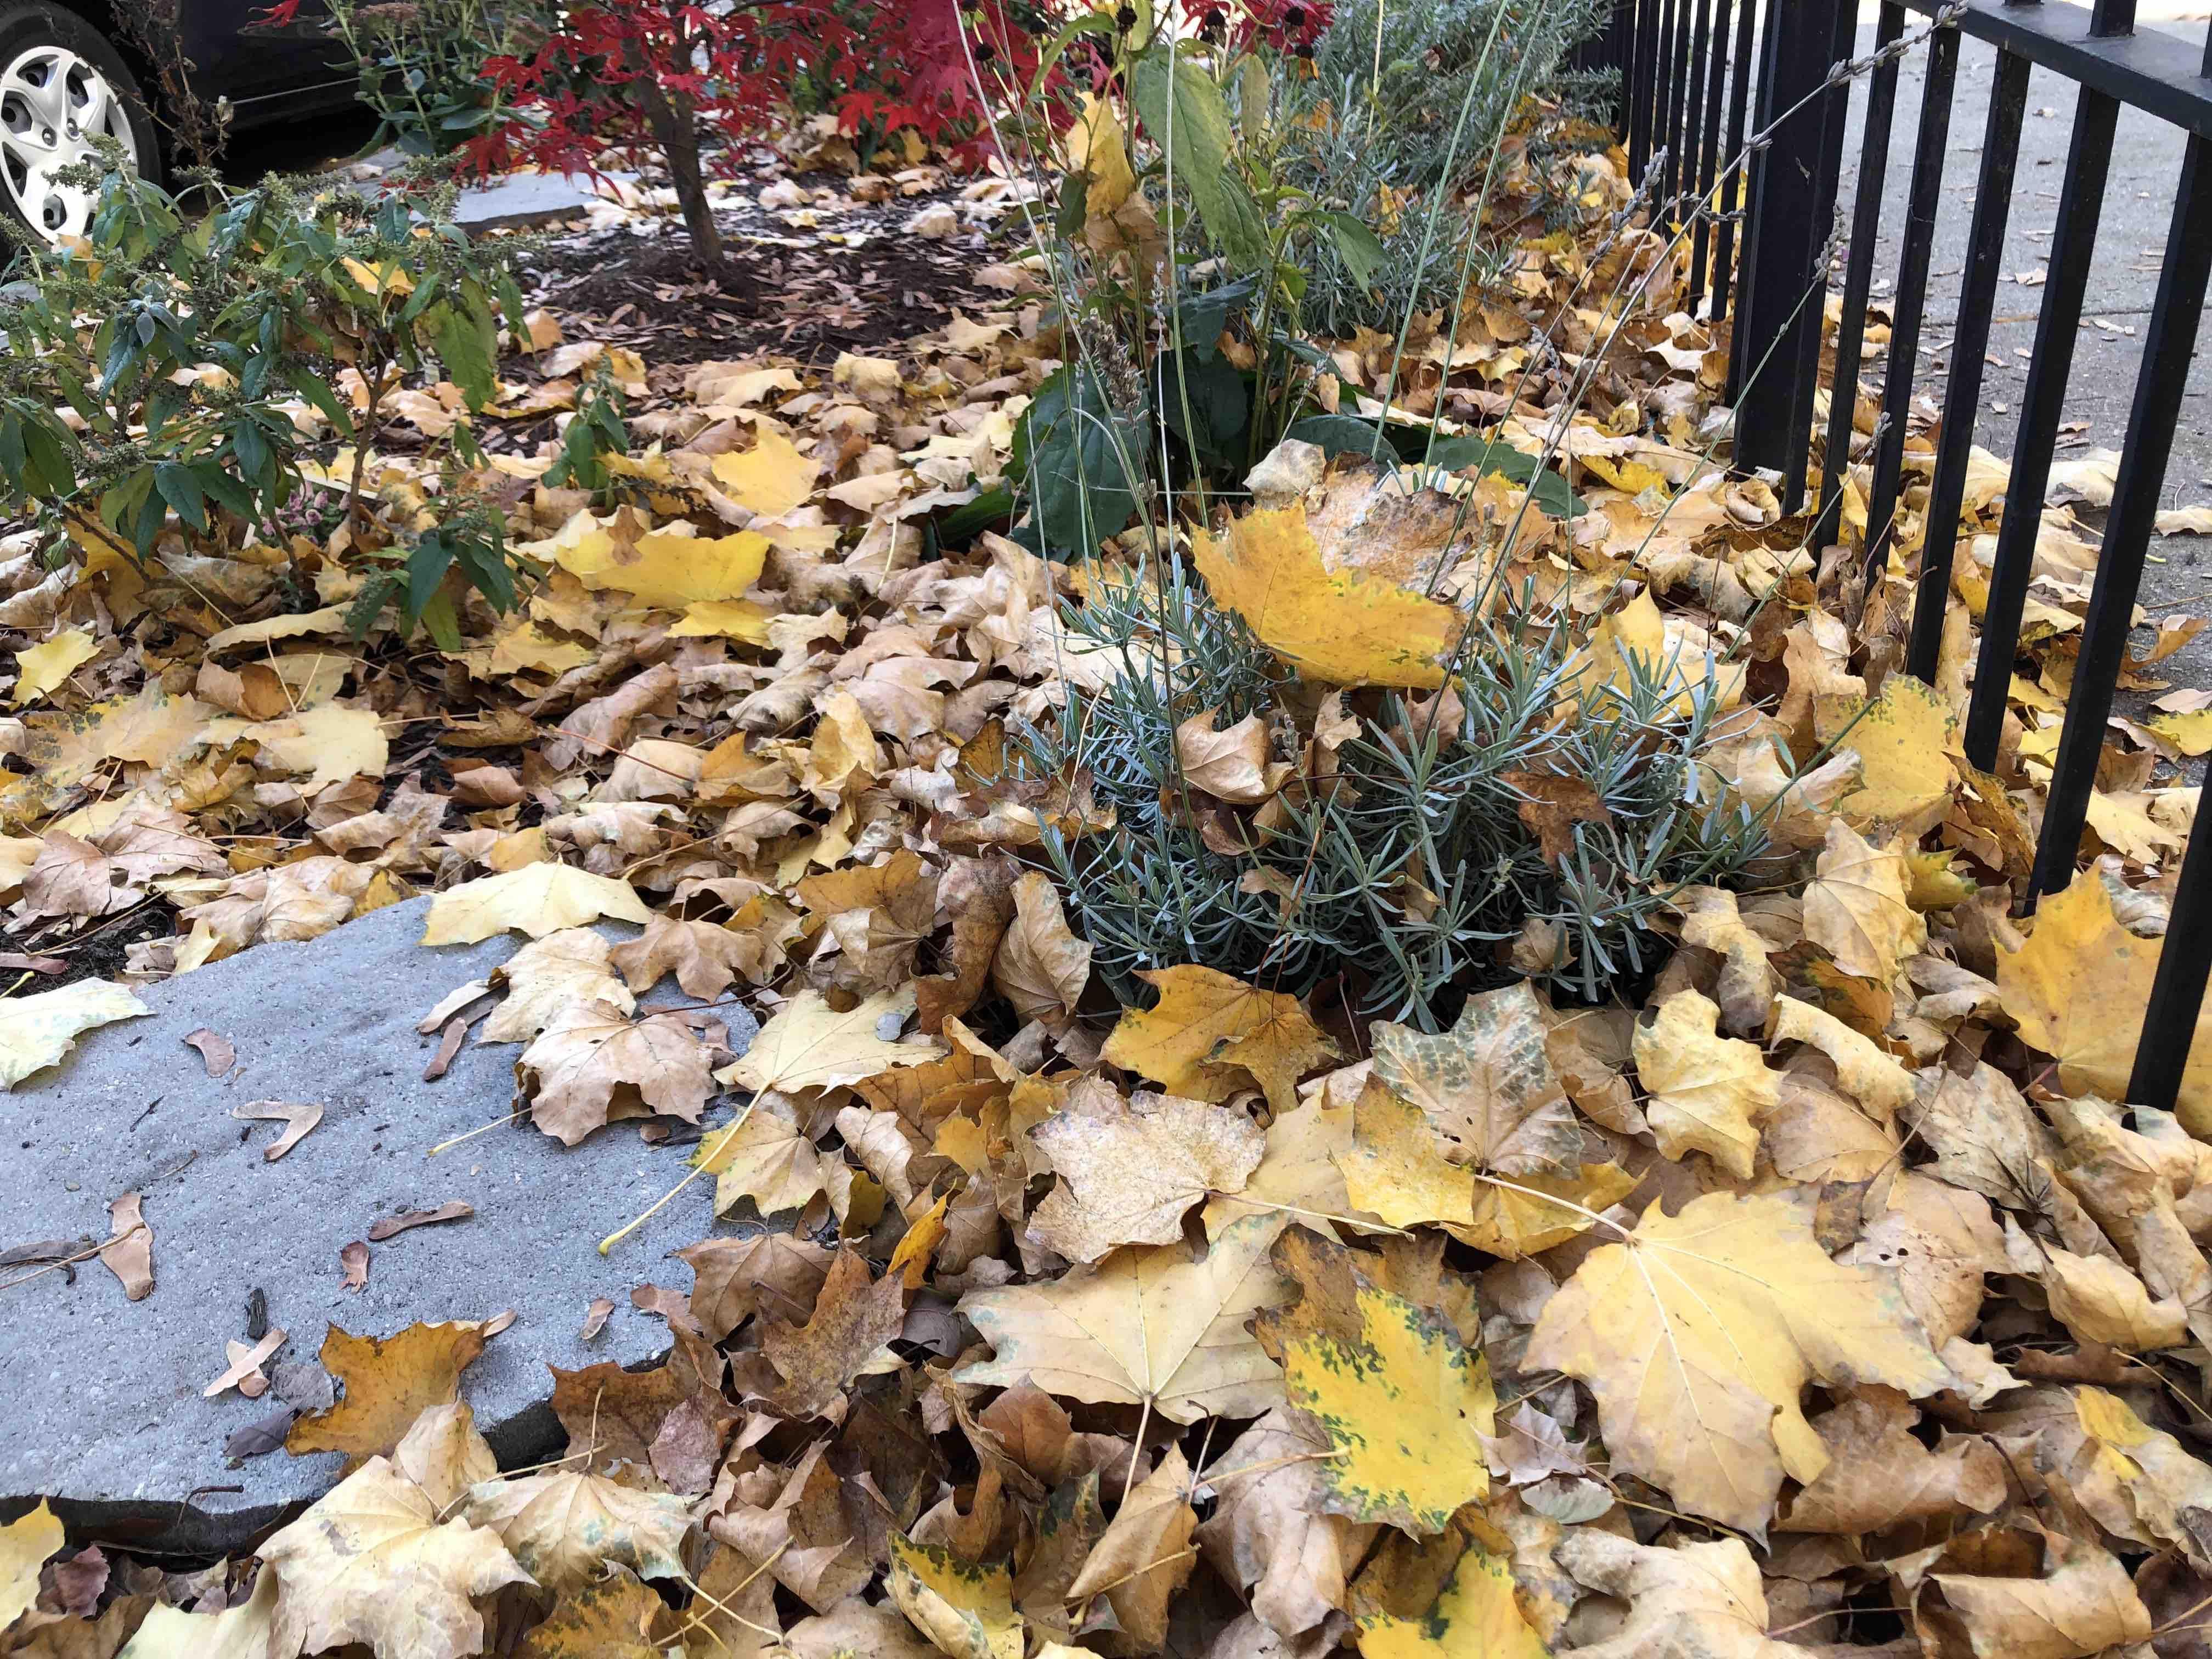 Leaves can be used as mulch in garden beds. (Patty Wetli / WTTW News)